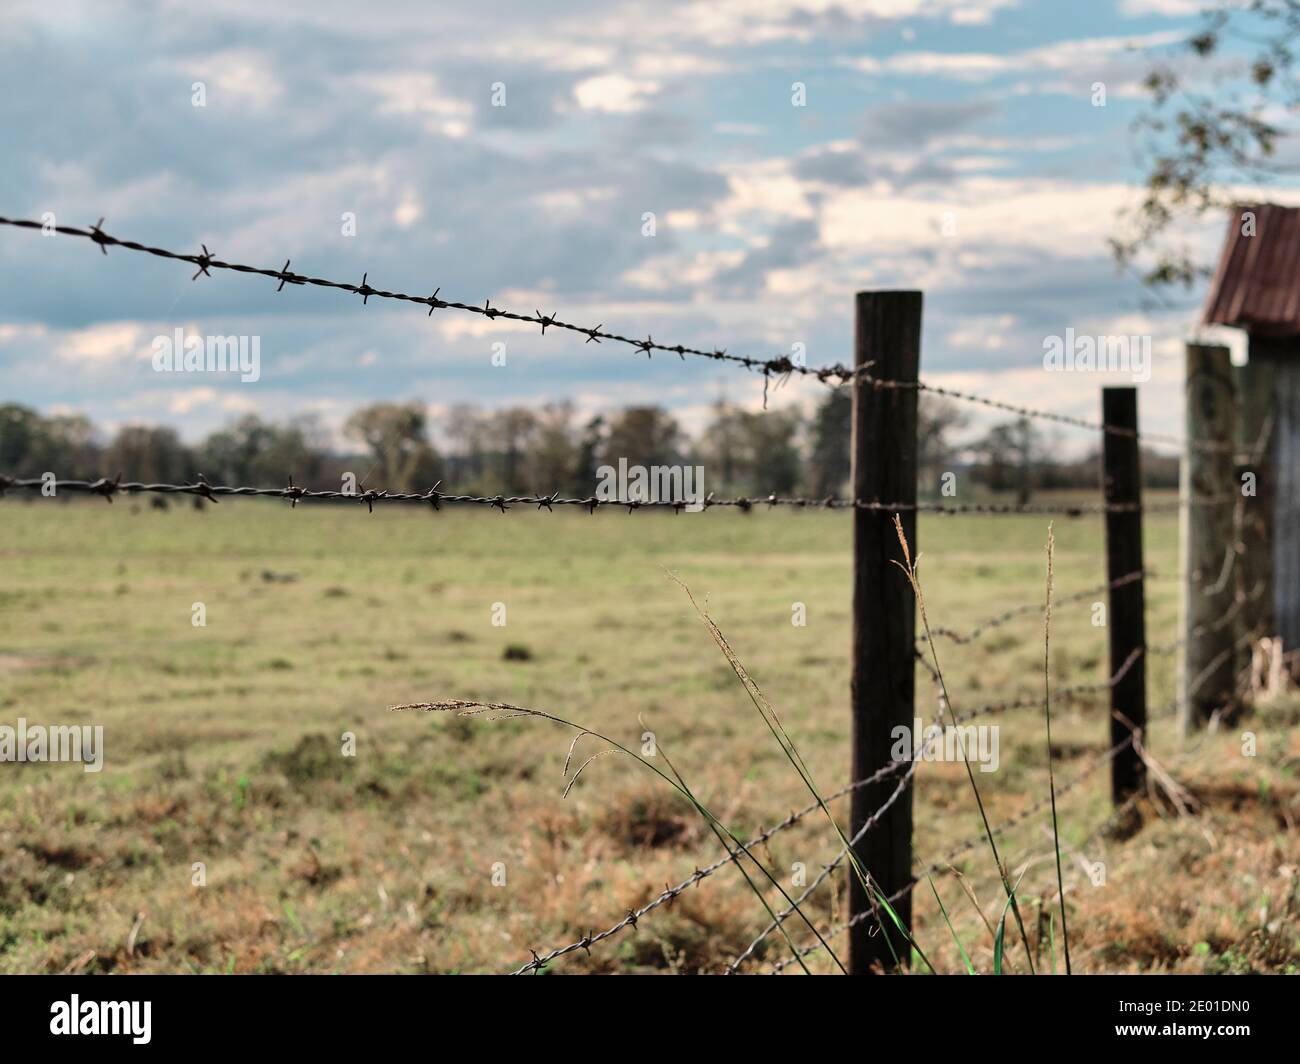 Barbed wire fence, fencing off a pasture on a farm or ranch to confine cattle in Alabama, USA. Stock Photo